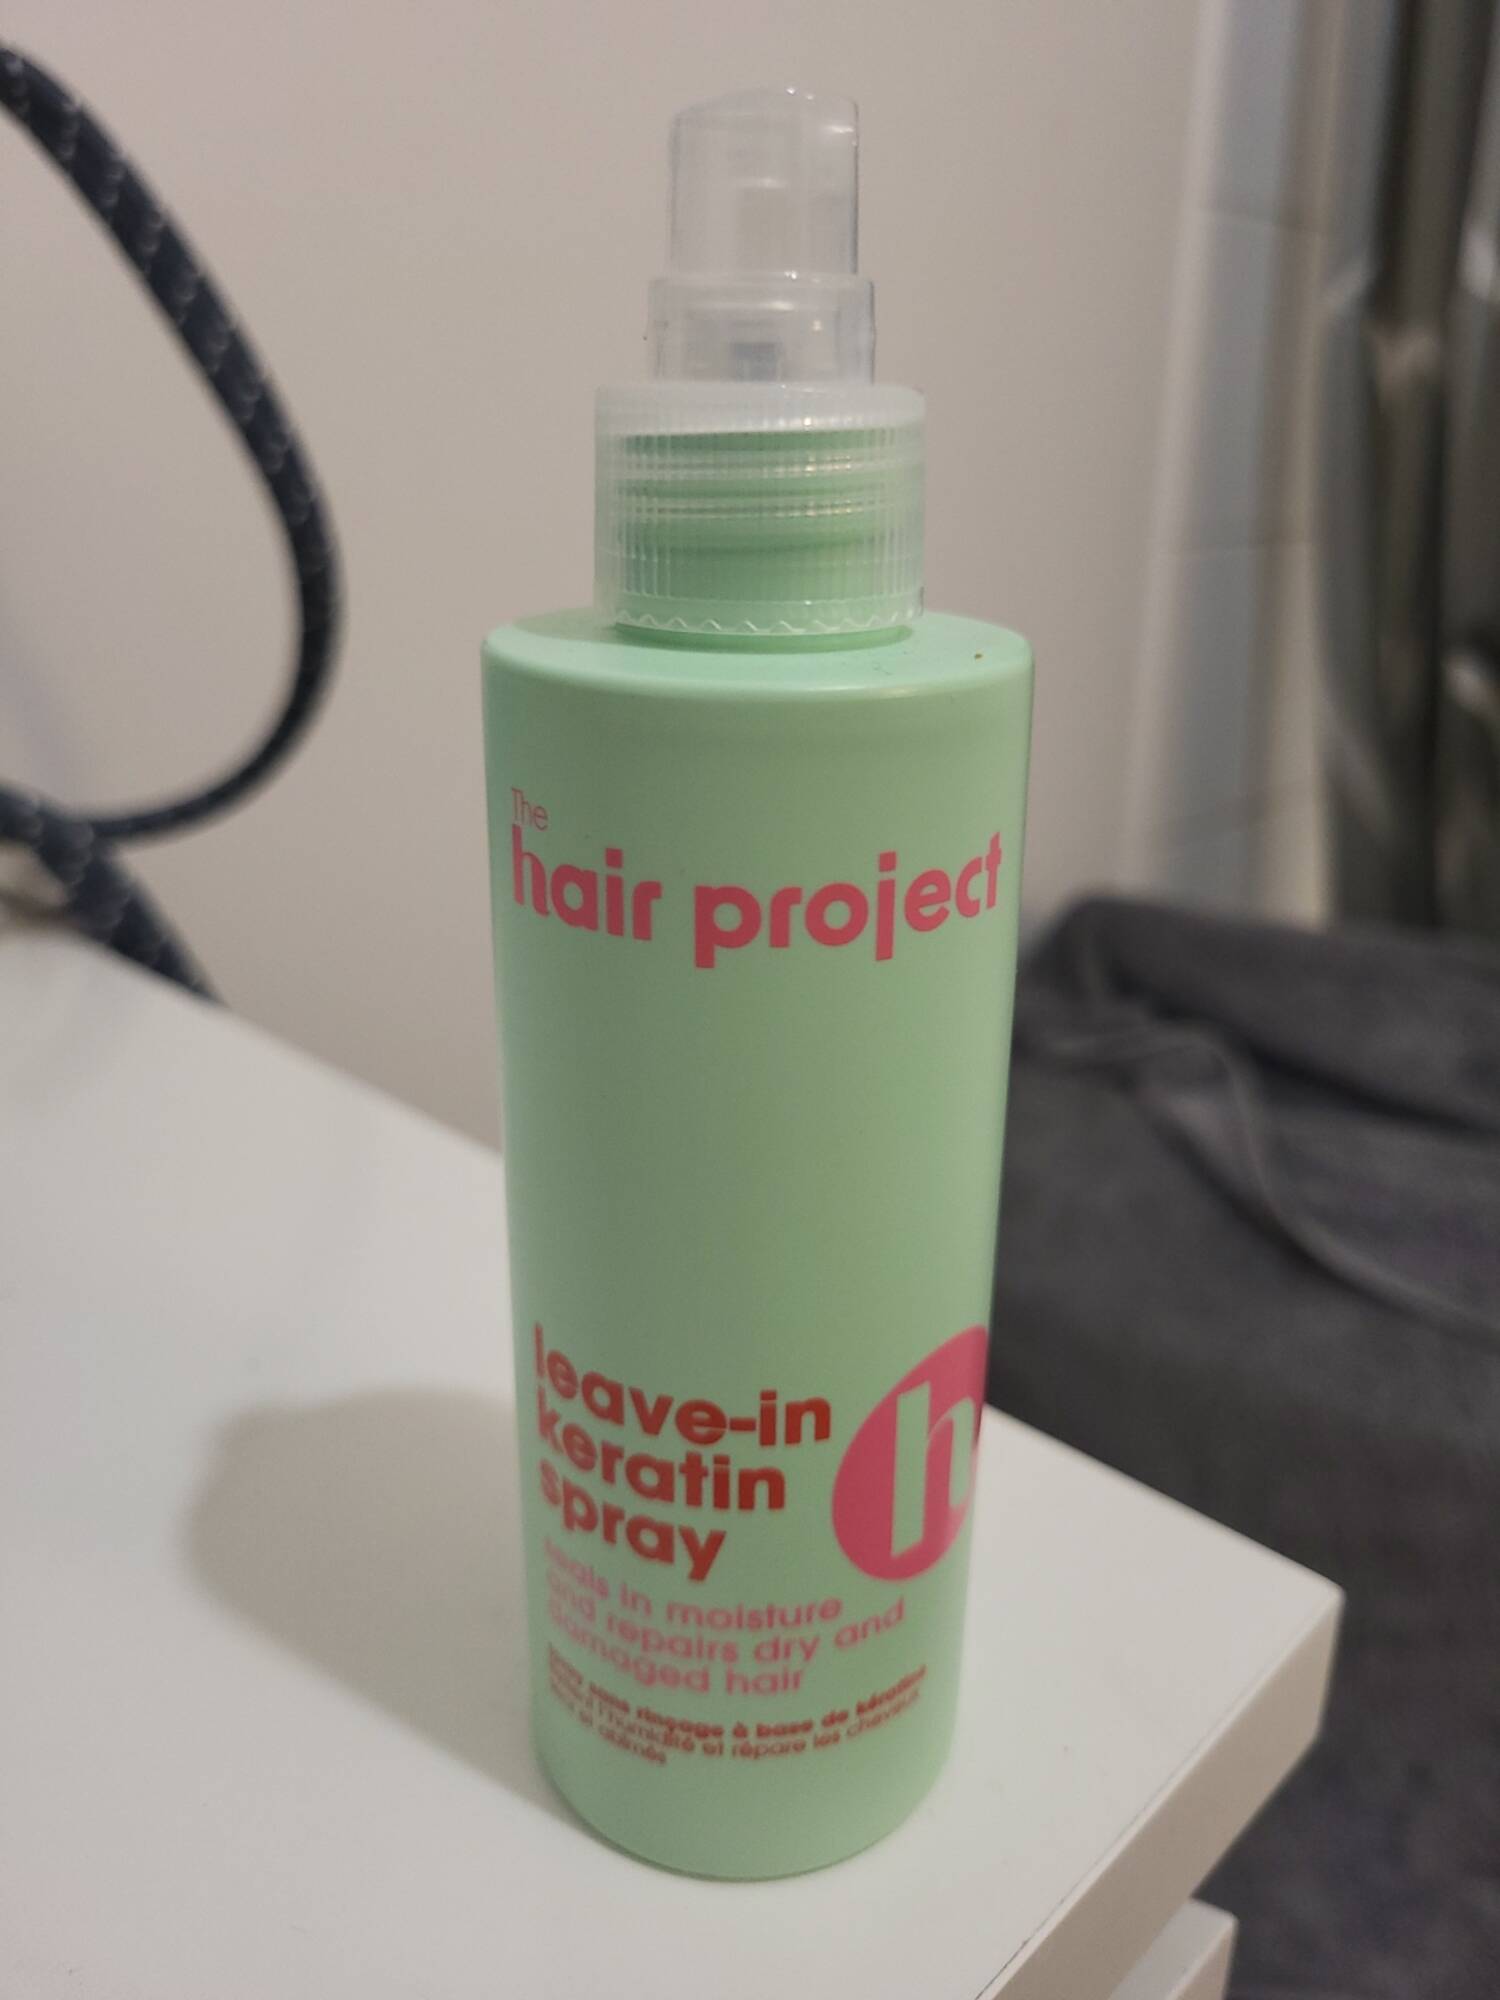 THE HAIR PROJECT - Leave-in keratin spray 